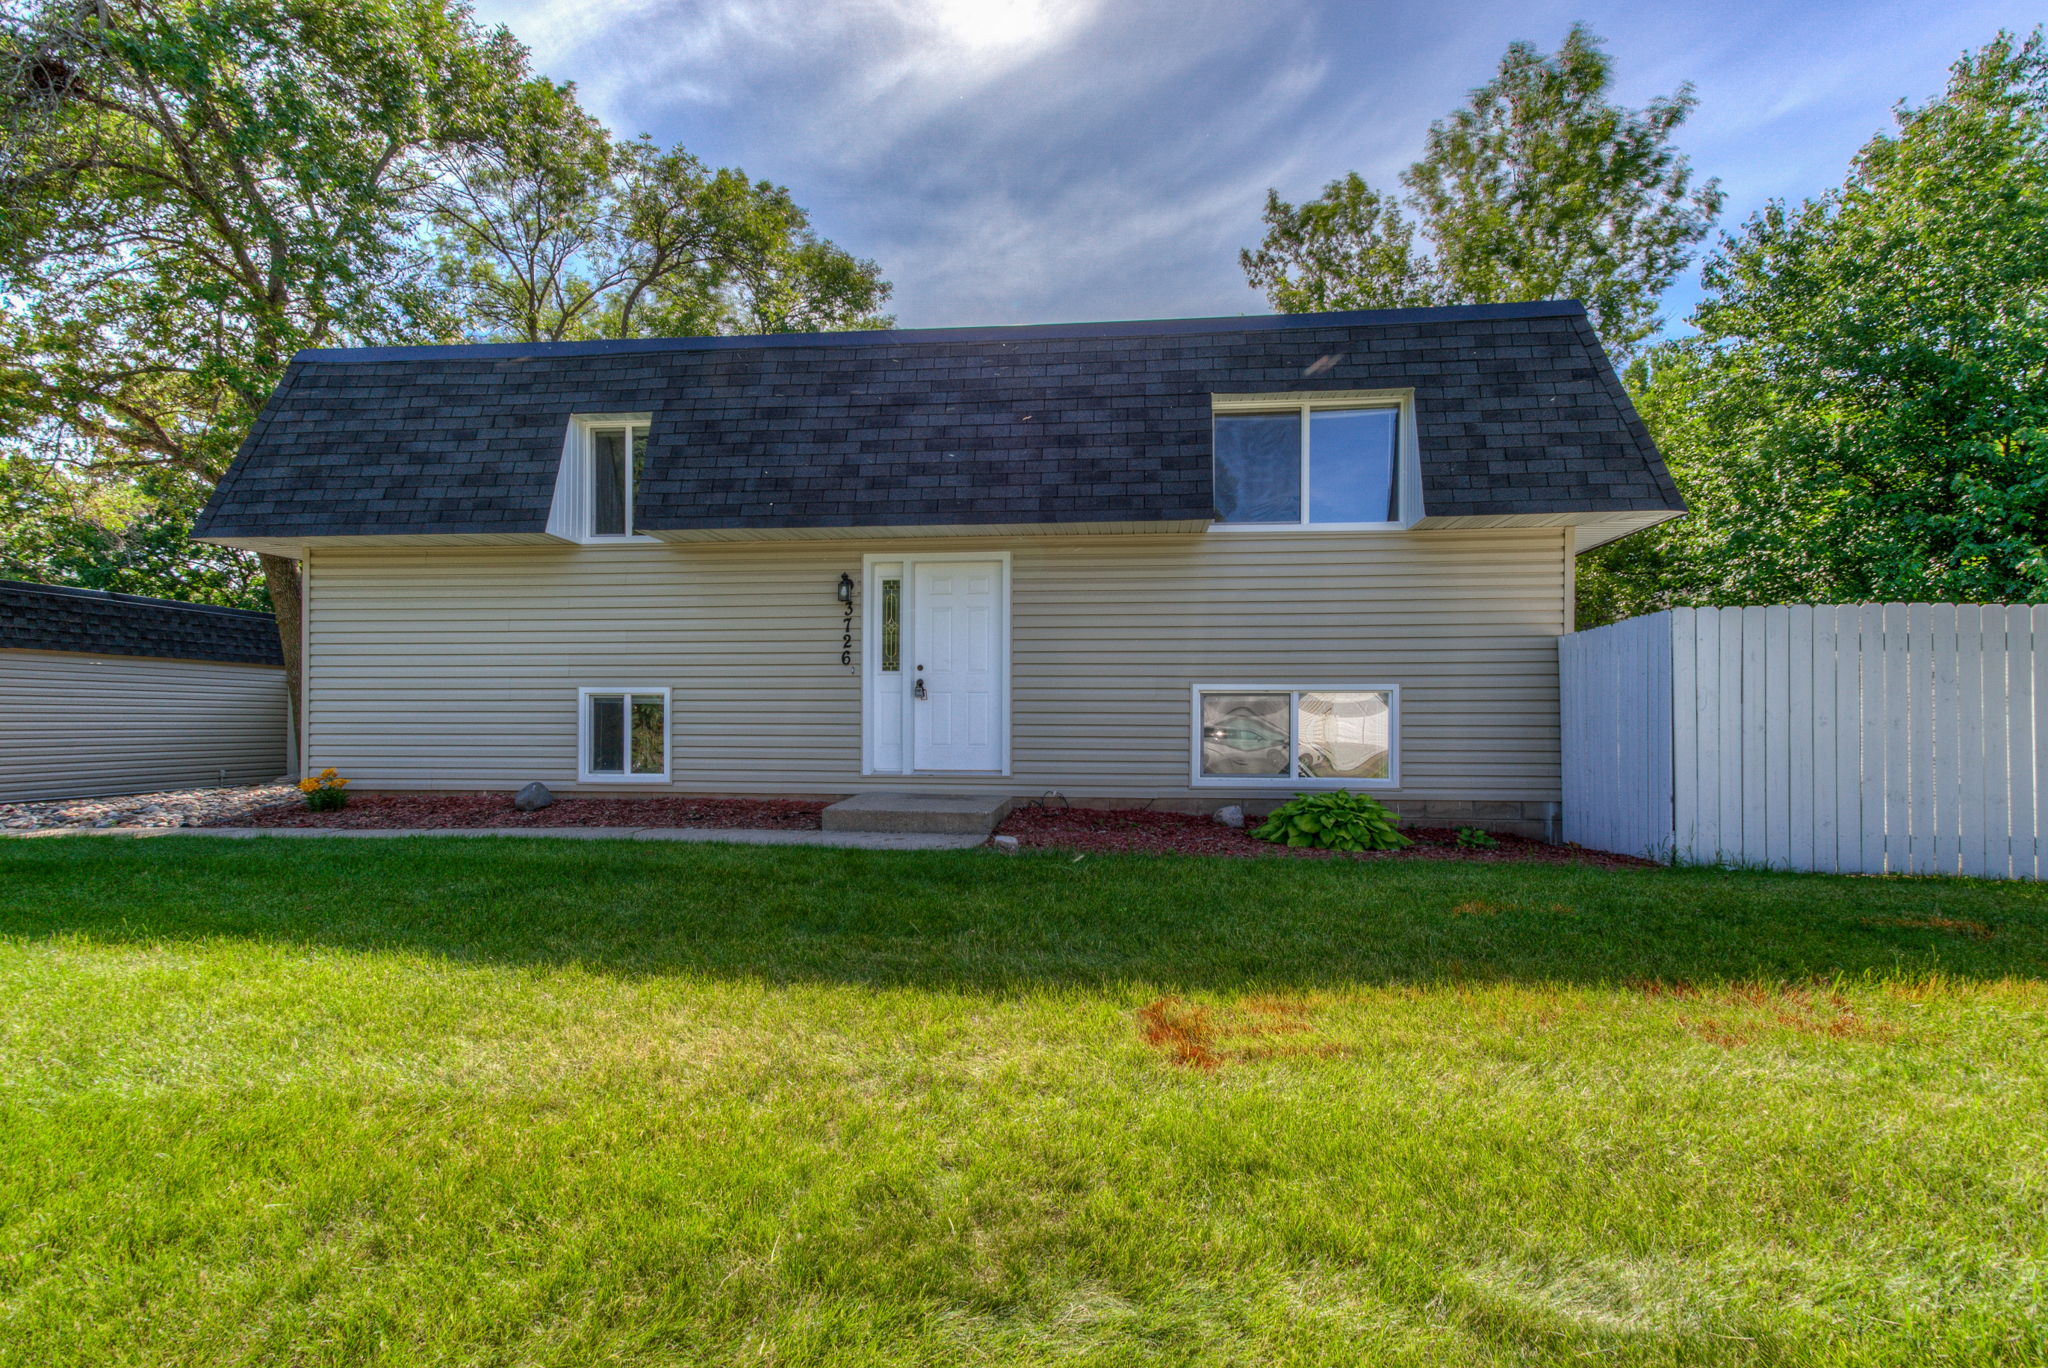  3726 Conroy Trail, Inver Grove Heights, MN 55076, US